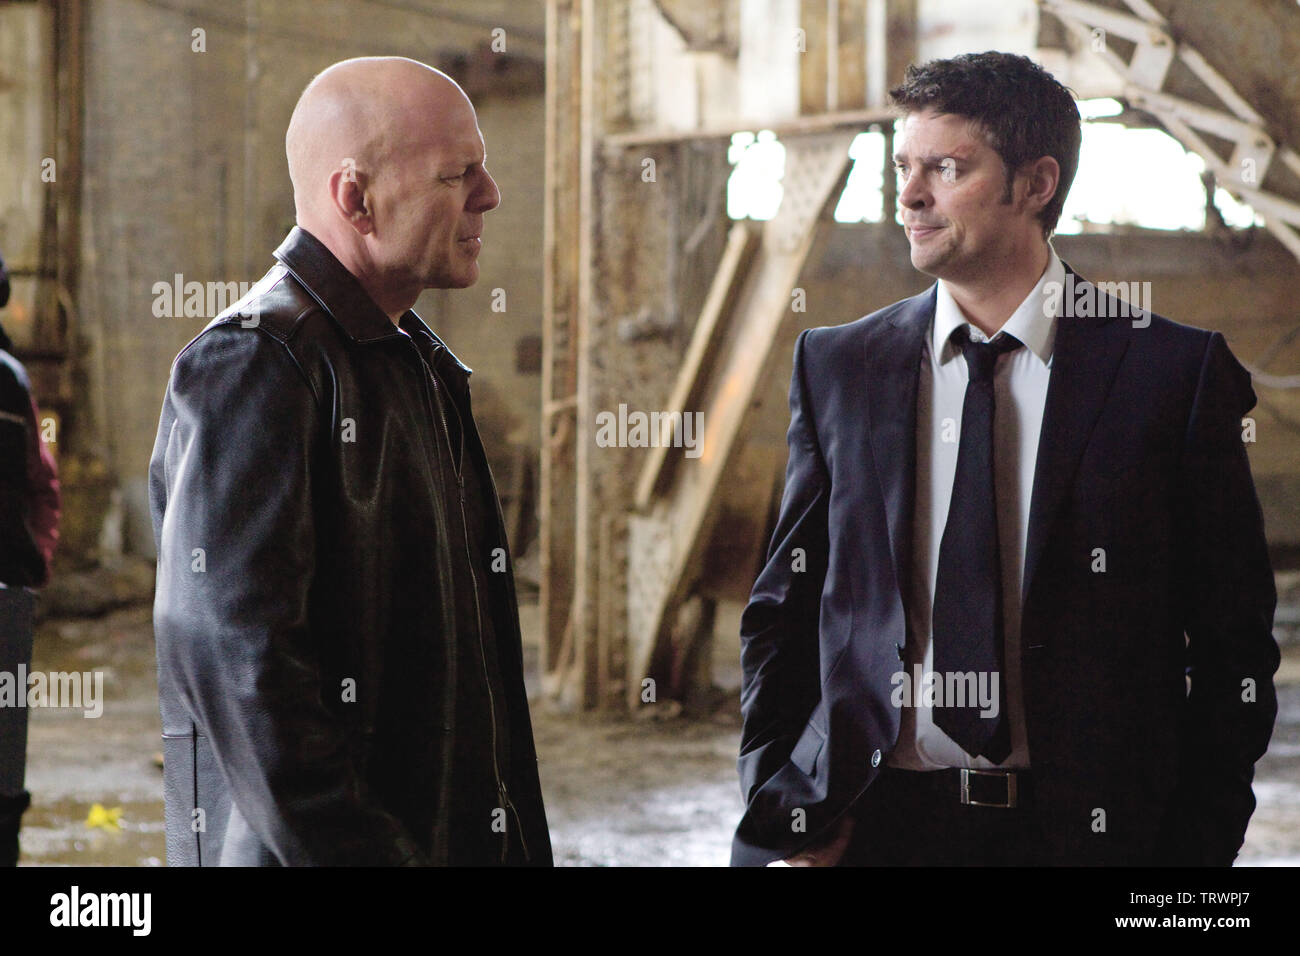 BRUCE WILLIS and KARL URBAN in RED (2010). Copyright: Editorial use only.  No merchandising or book covers. This is a publicly distributed handout.  Access rights only, no license of copyright provided. Only